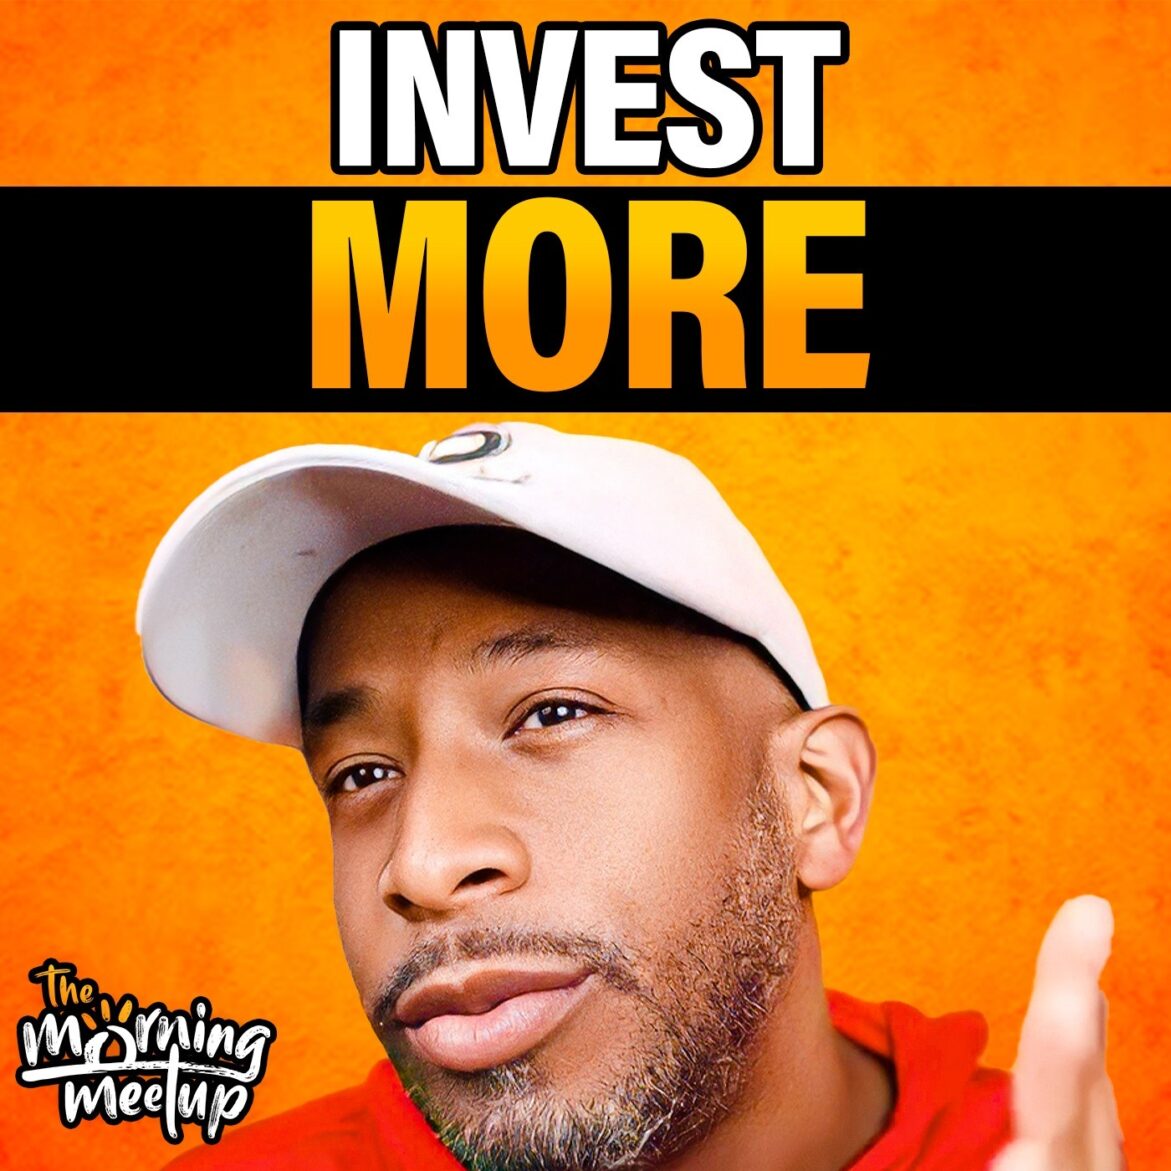 Black Podcasting - How To Invest More to Earn More - David Shands